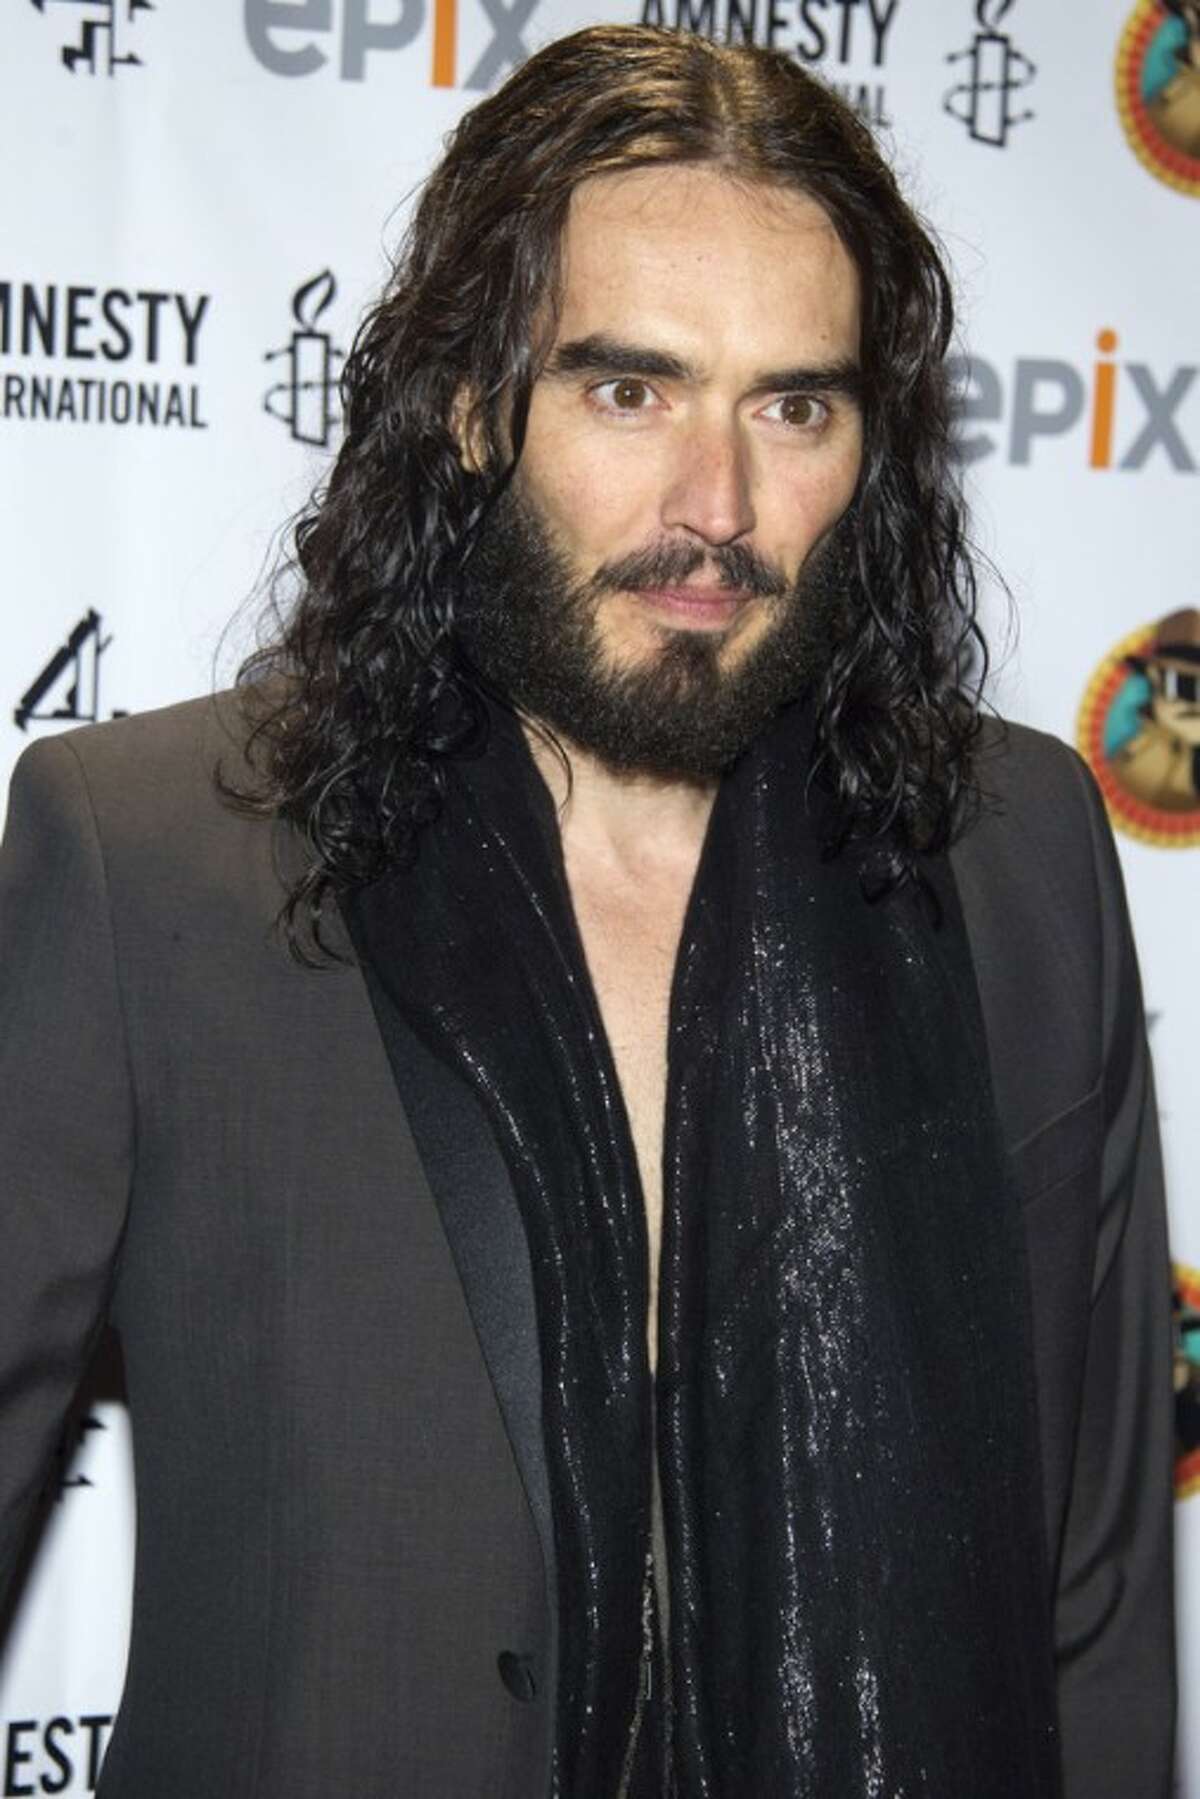 AP Photo In this March 4, 2012, file photo, Russell Brand arrives to Amnesty International's "Secret Policeman's Ball" in New York.